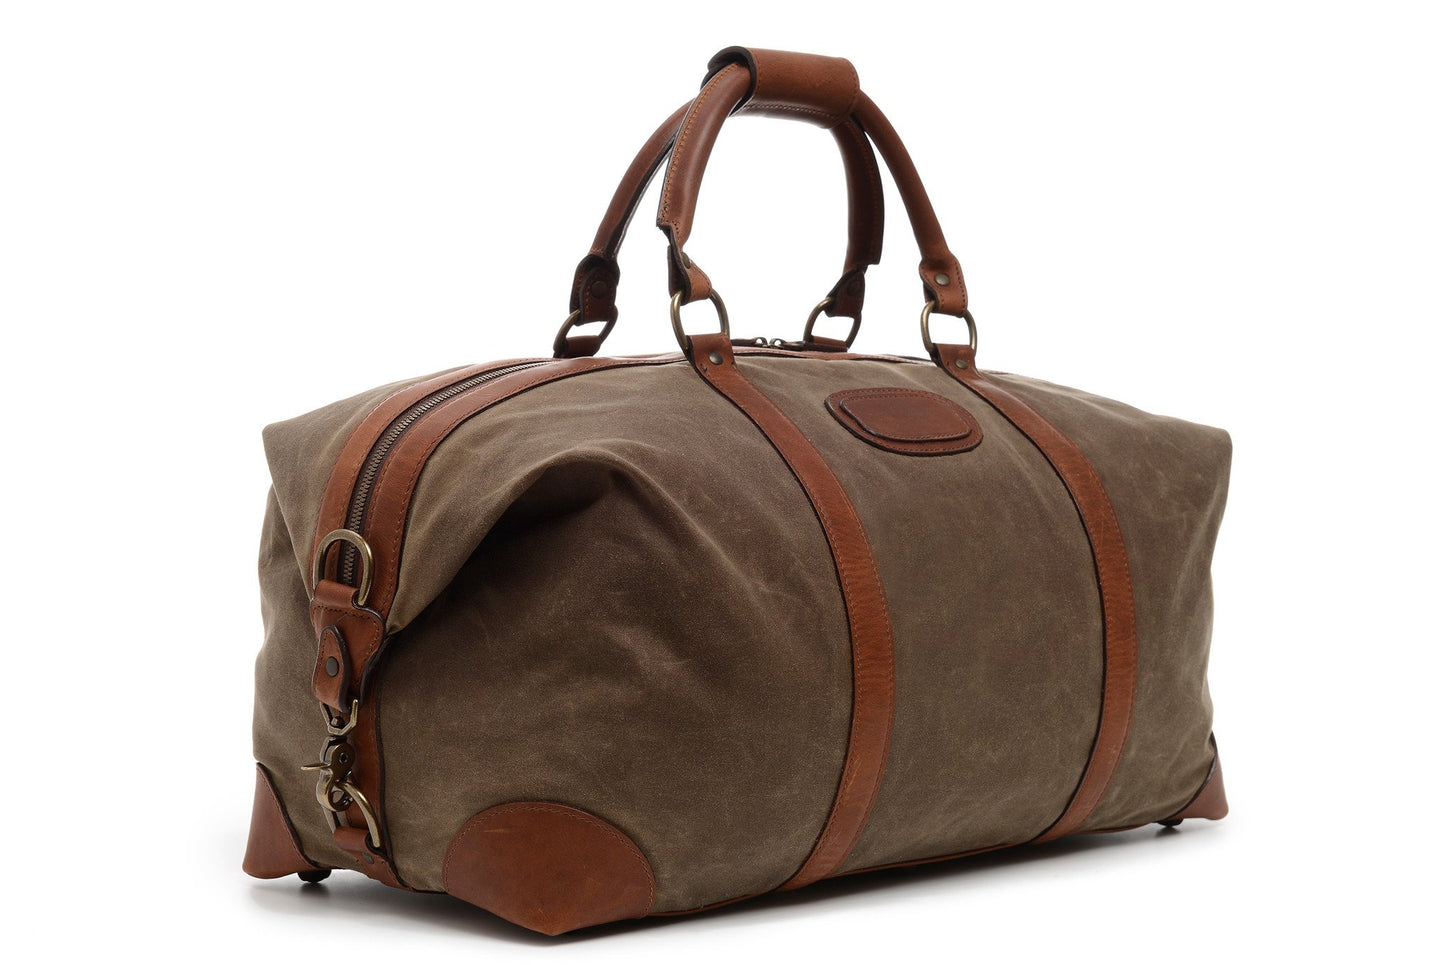 Duffel | Tan Waxed Cotton and Leather Duffle | Twain Canvas Duffle | Korchmar Leather | Initials Included